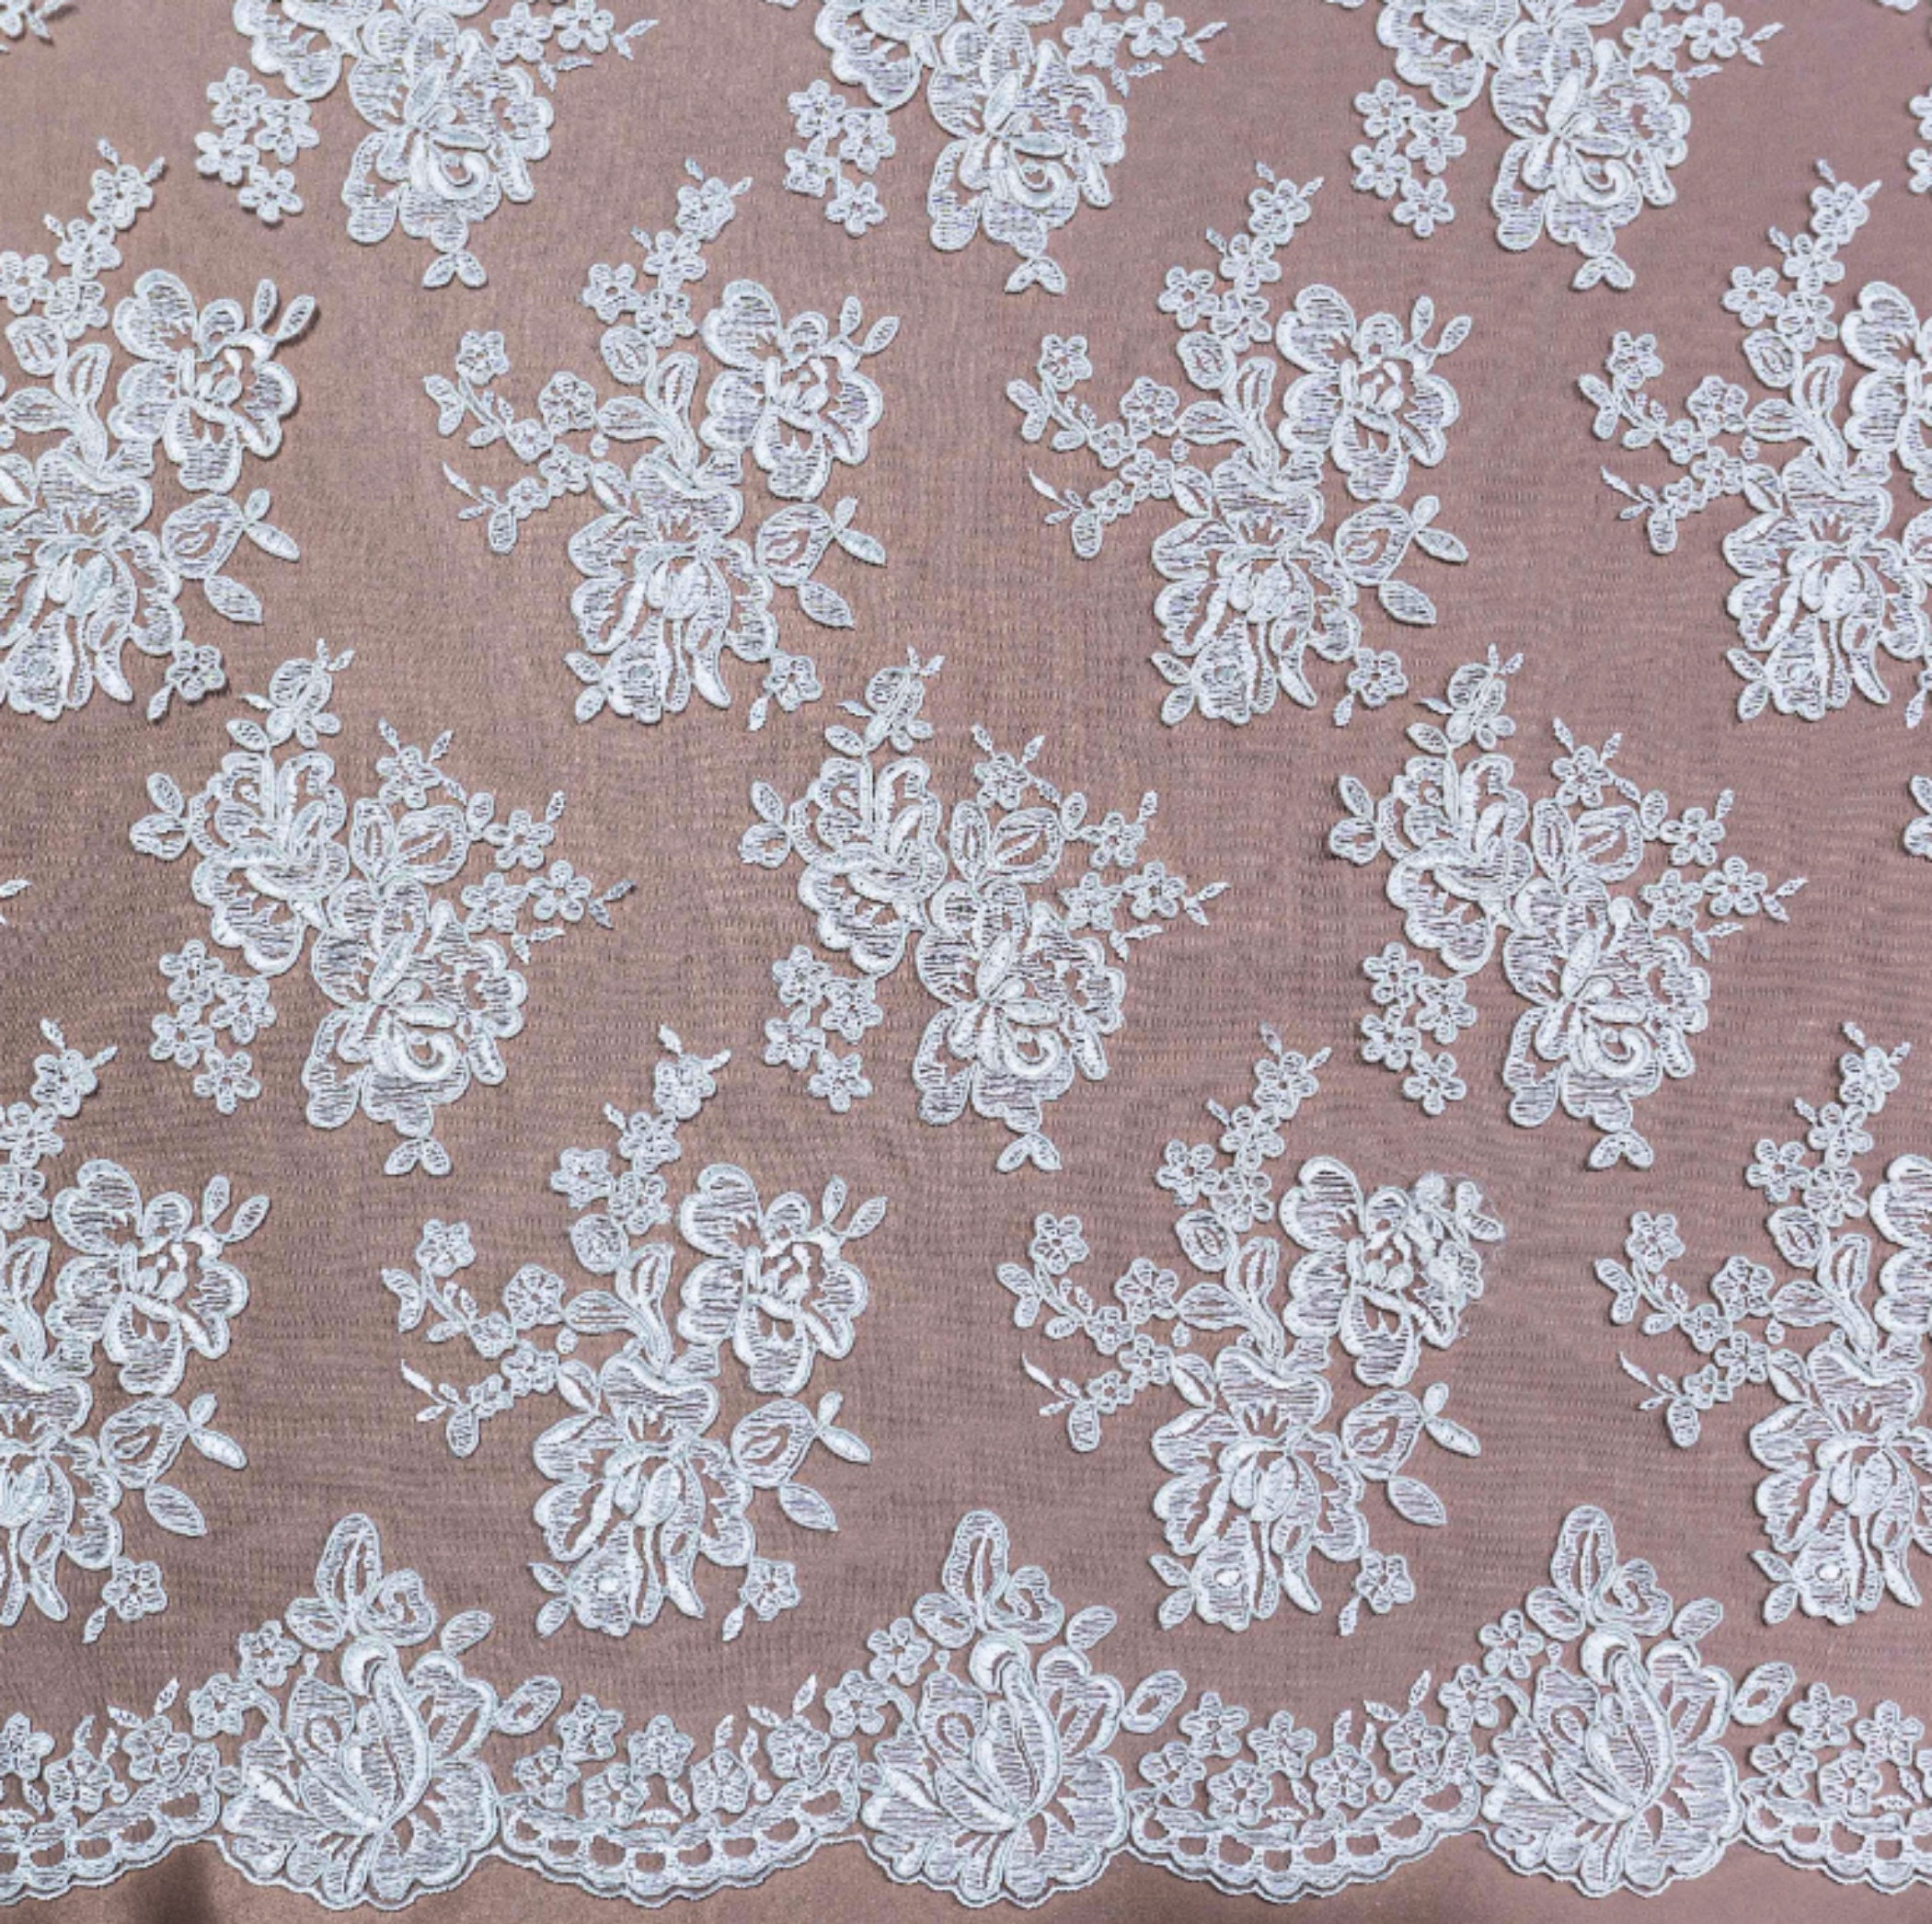 Soft french boho lace fabric Lace by the yard crochet fabric | Etsy